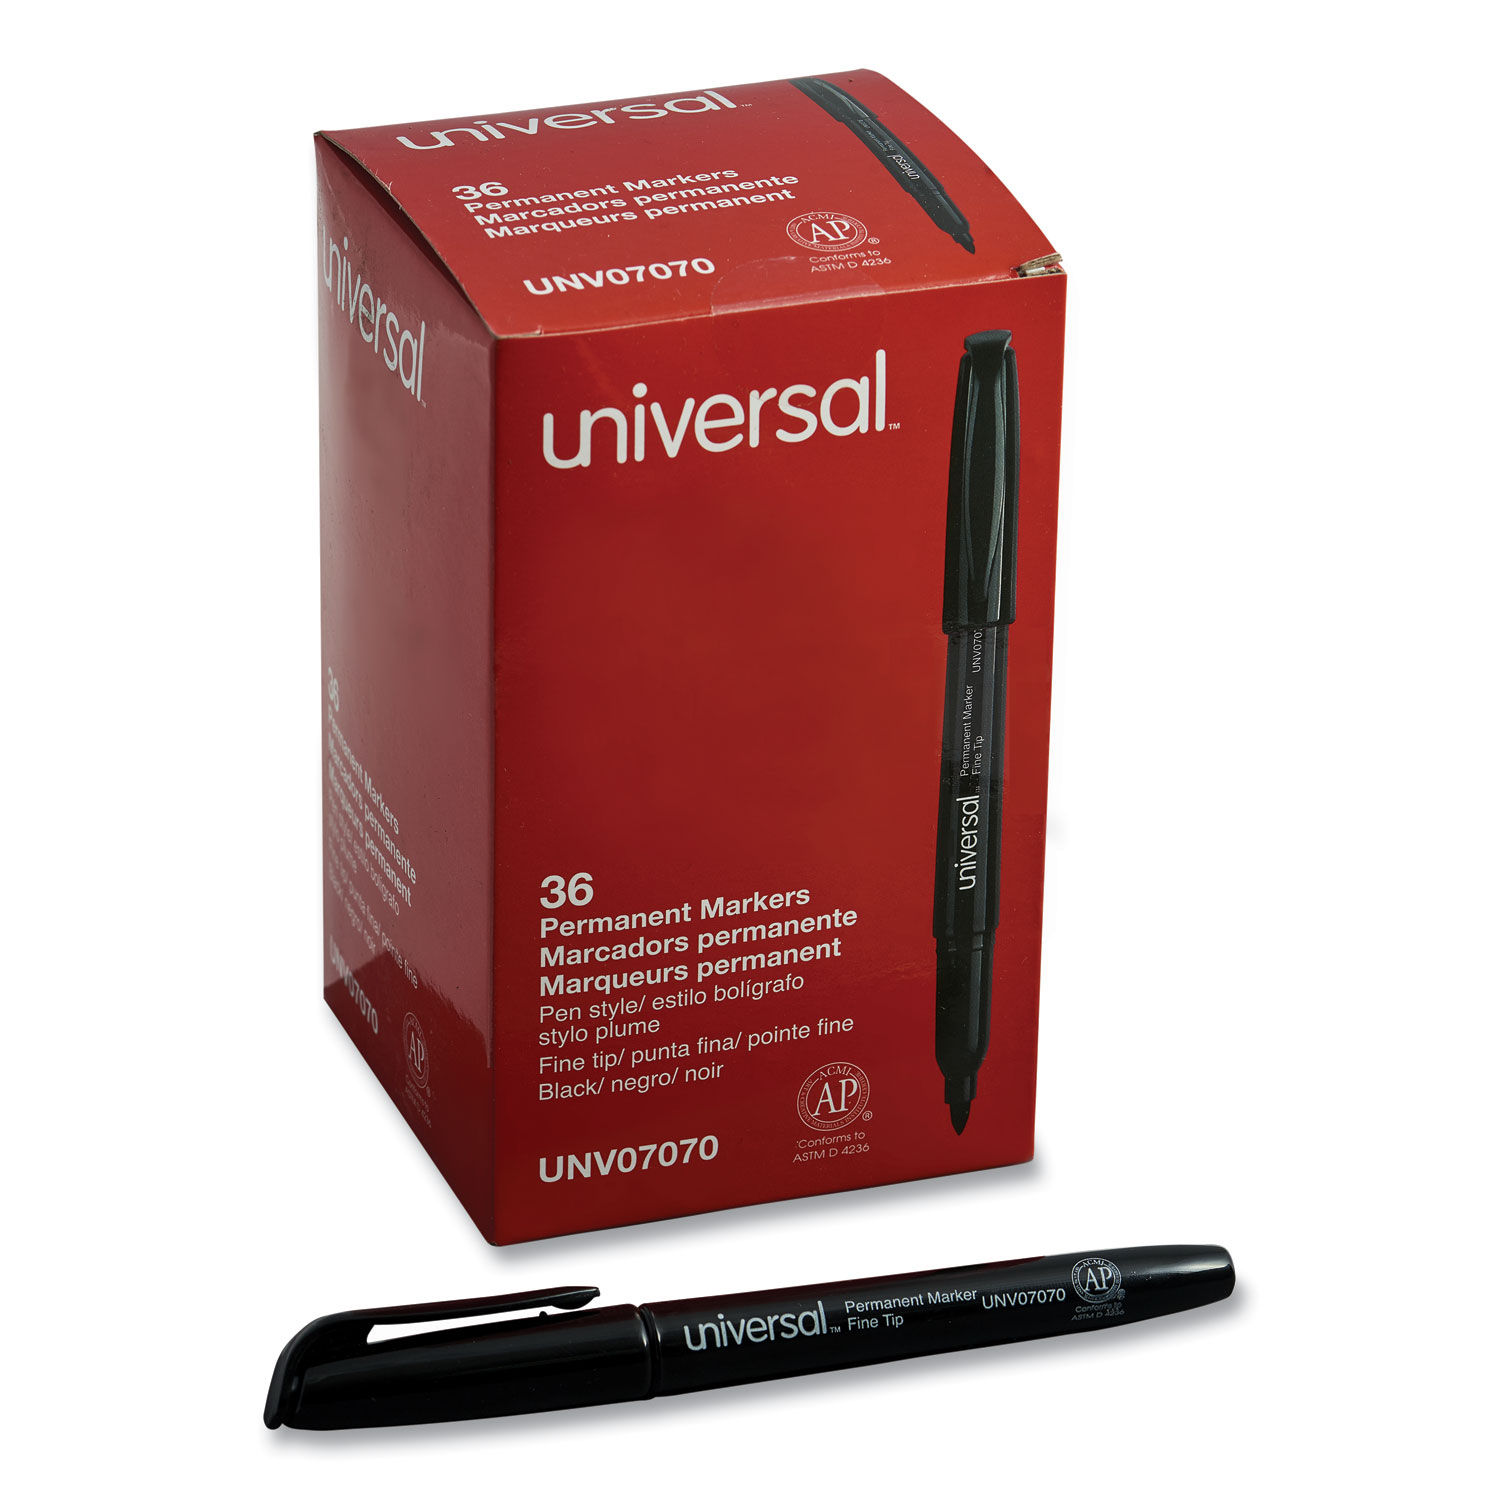 Pen-Style Permanent Marker Value Pack by Universalandtrade; UNV07070